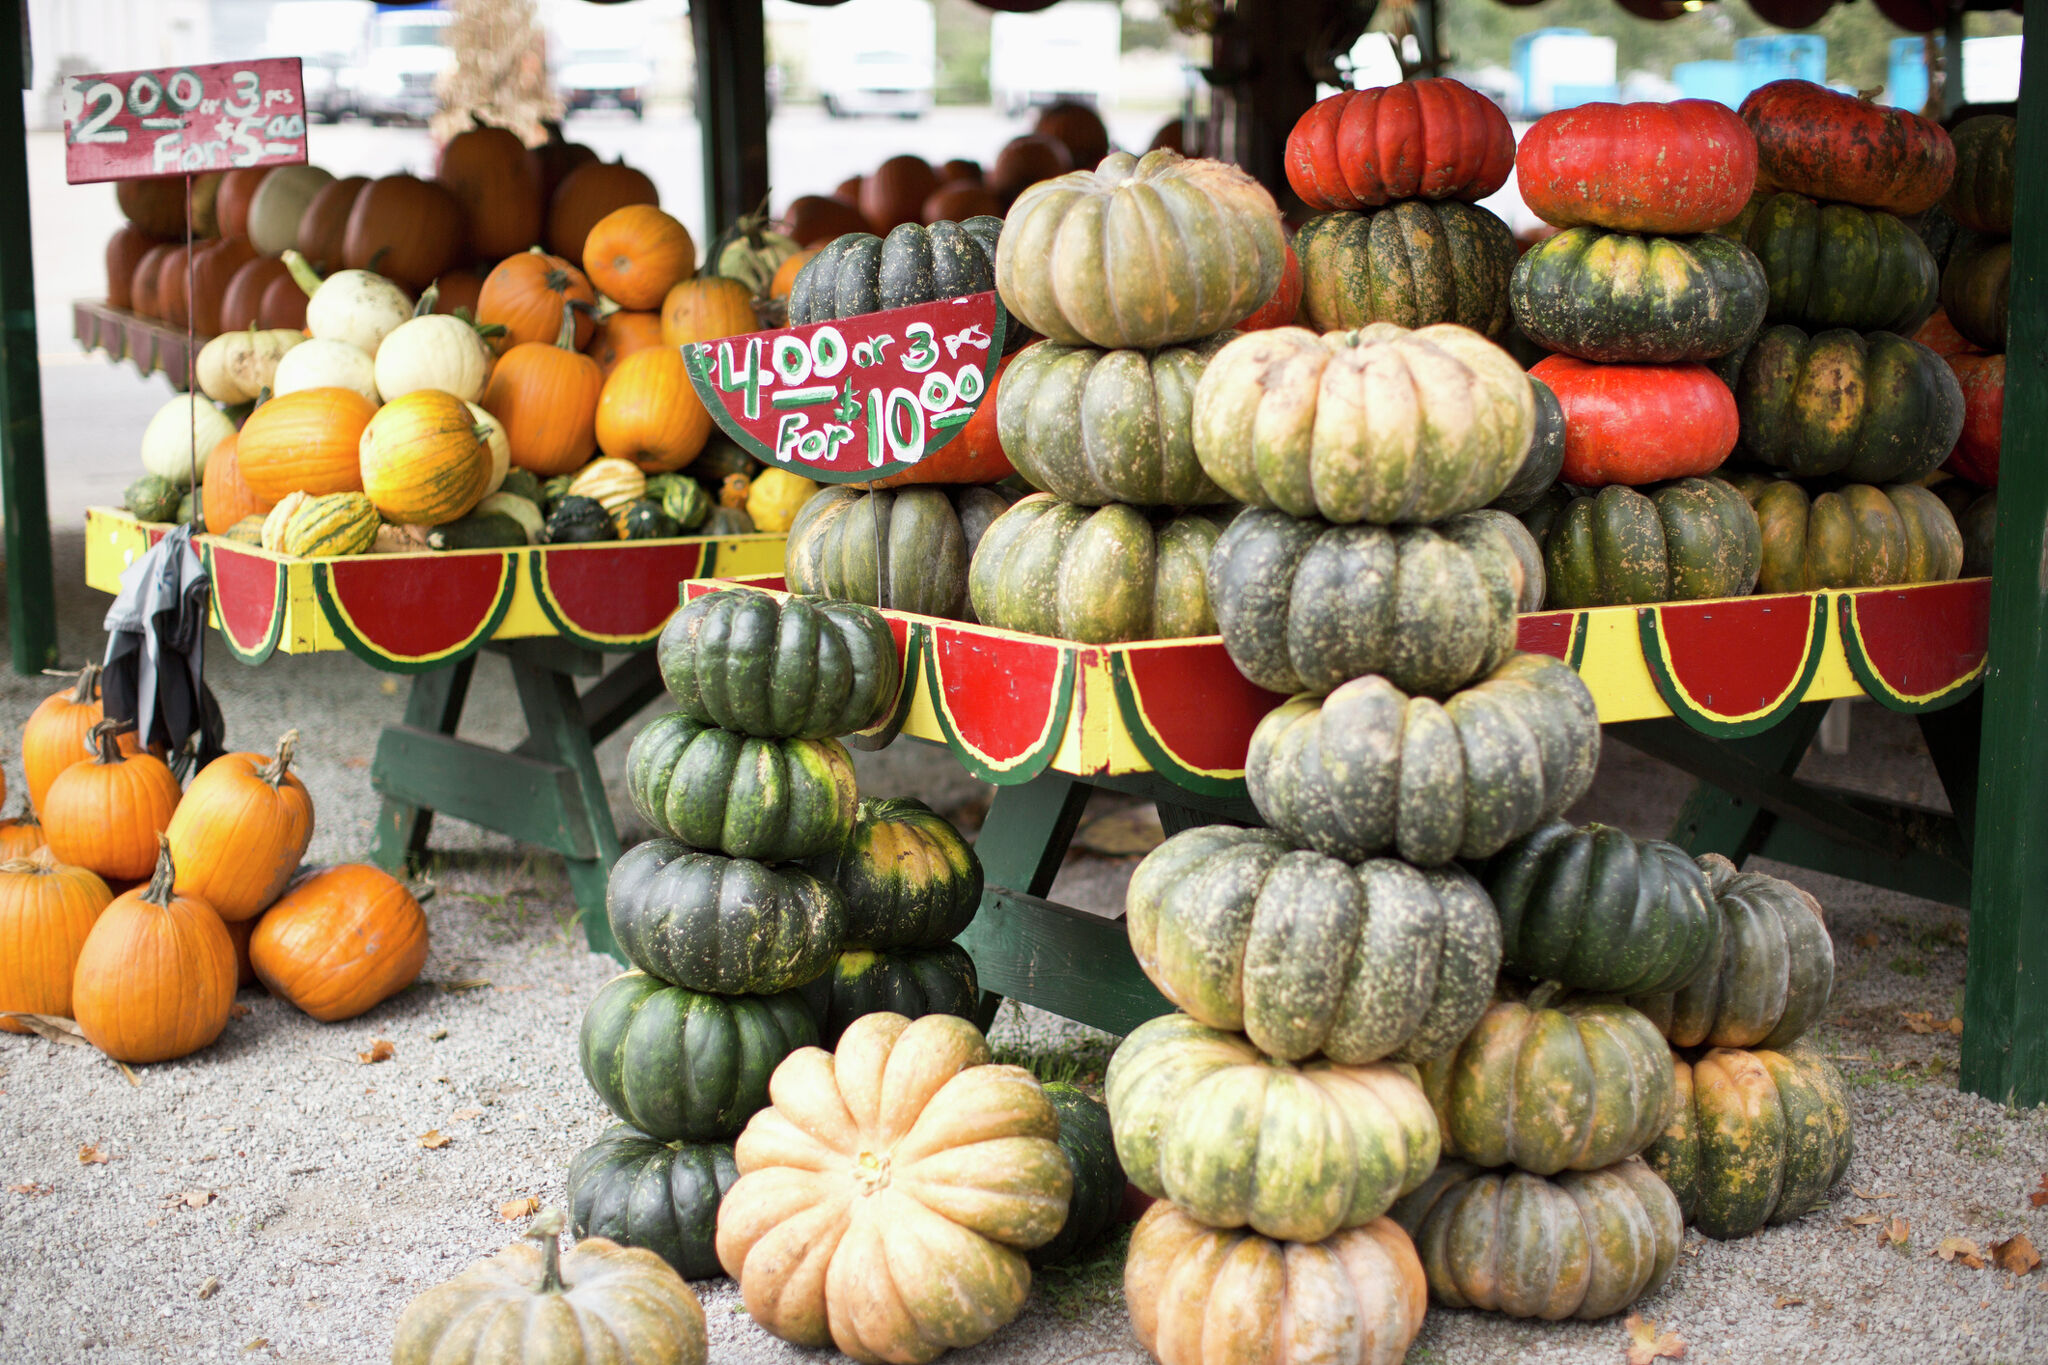 Illinois Products Farmers Market opens Thursday in Springfield